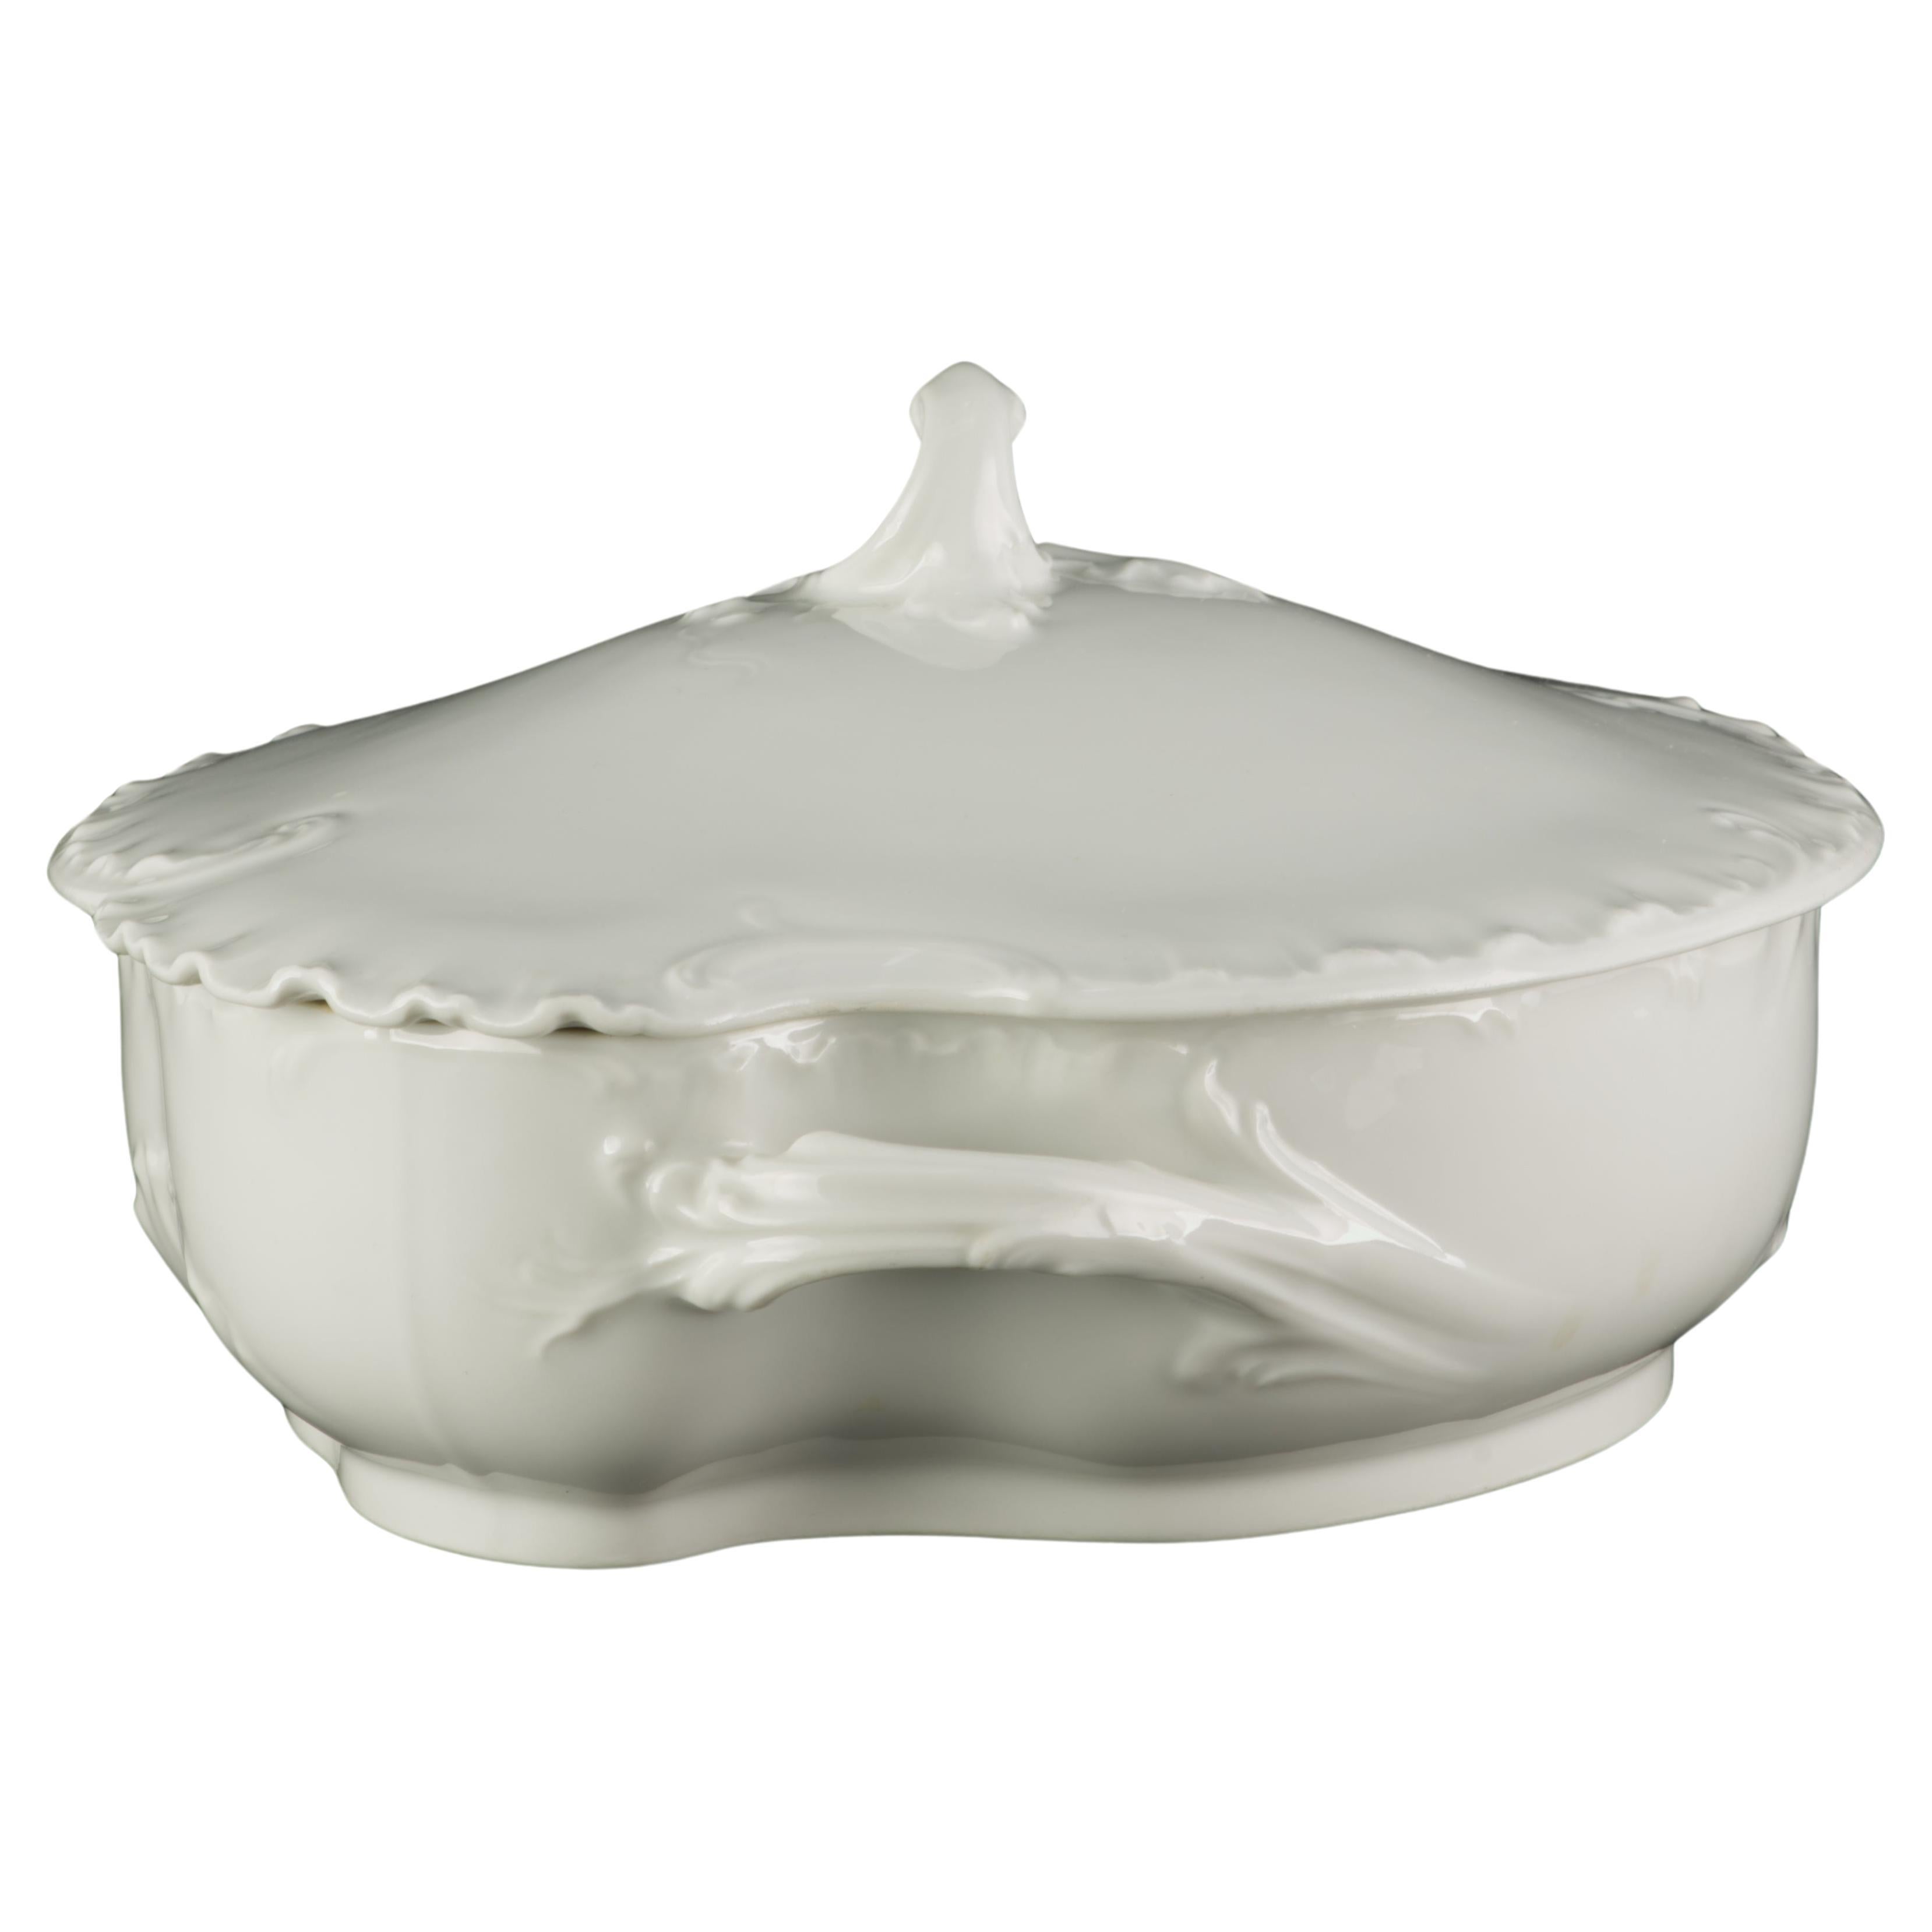 Haviland Limoges Oval Marseille Bowl with Cover, White Porcelain, 1894-1931 For Sale